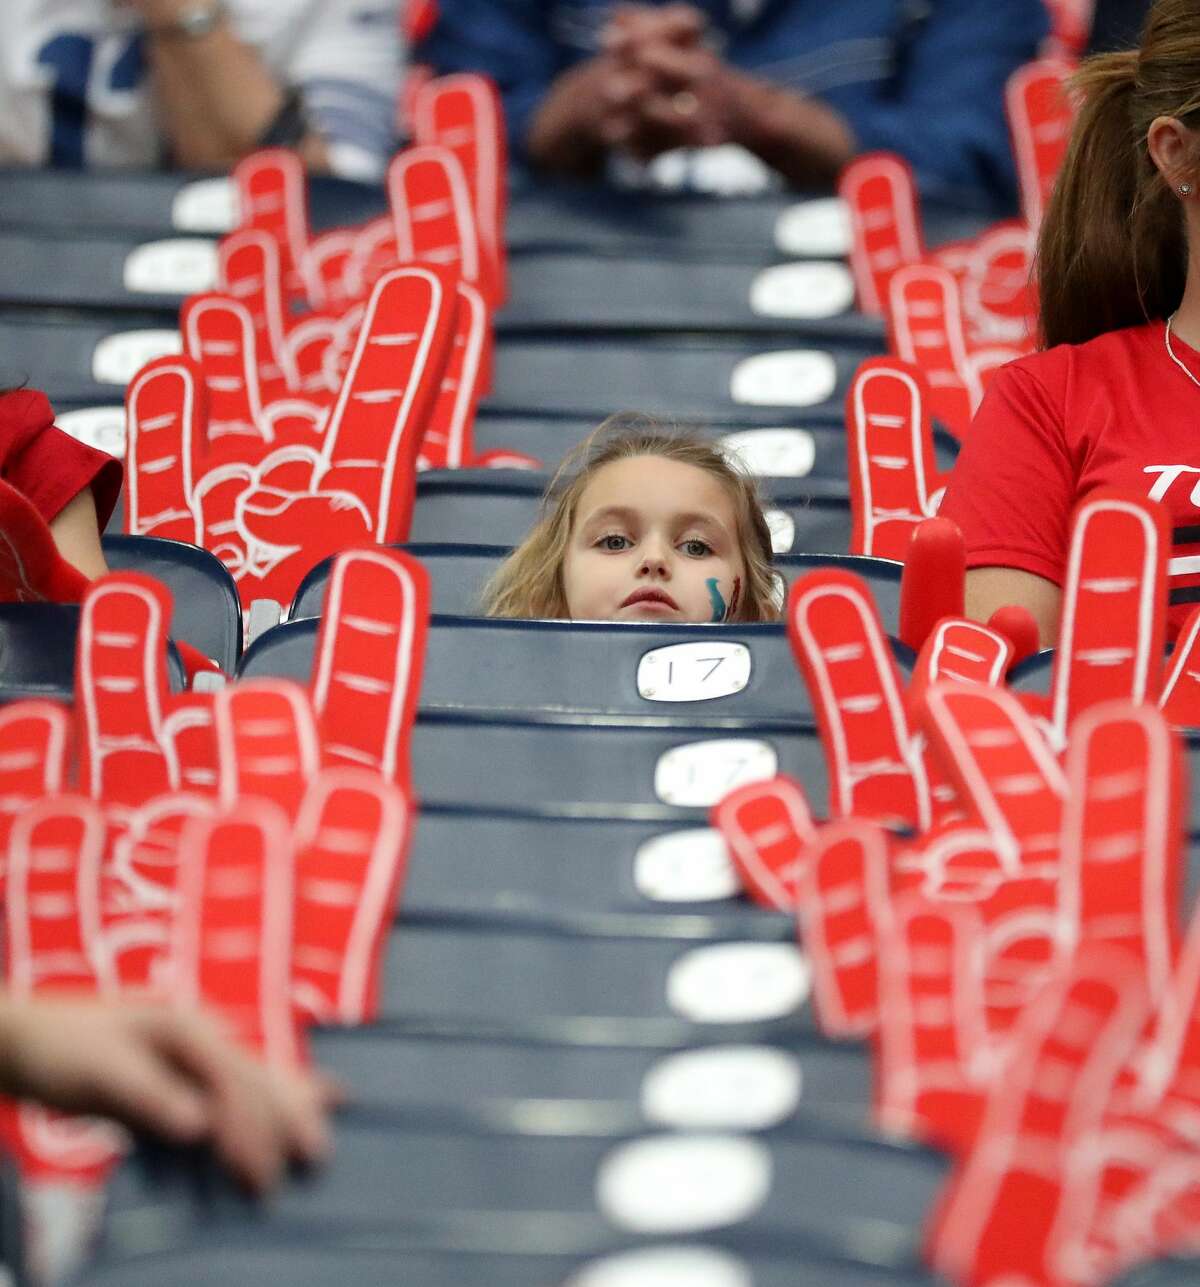 A little Houston Texans fan in her seats surrounded by foam hands during warmups before an NFL football game at NRG Stadium, Sunday, Dec. 5, 2021 in Houston.